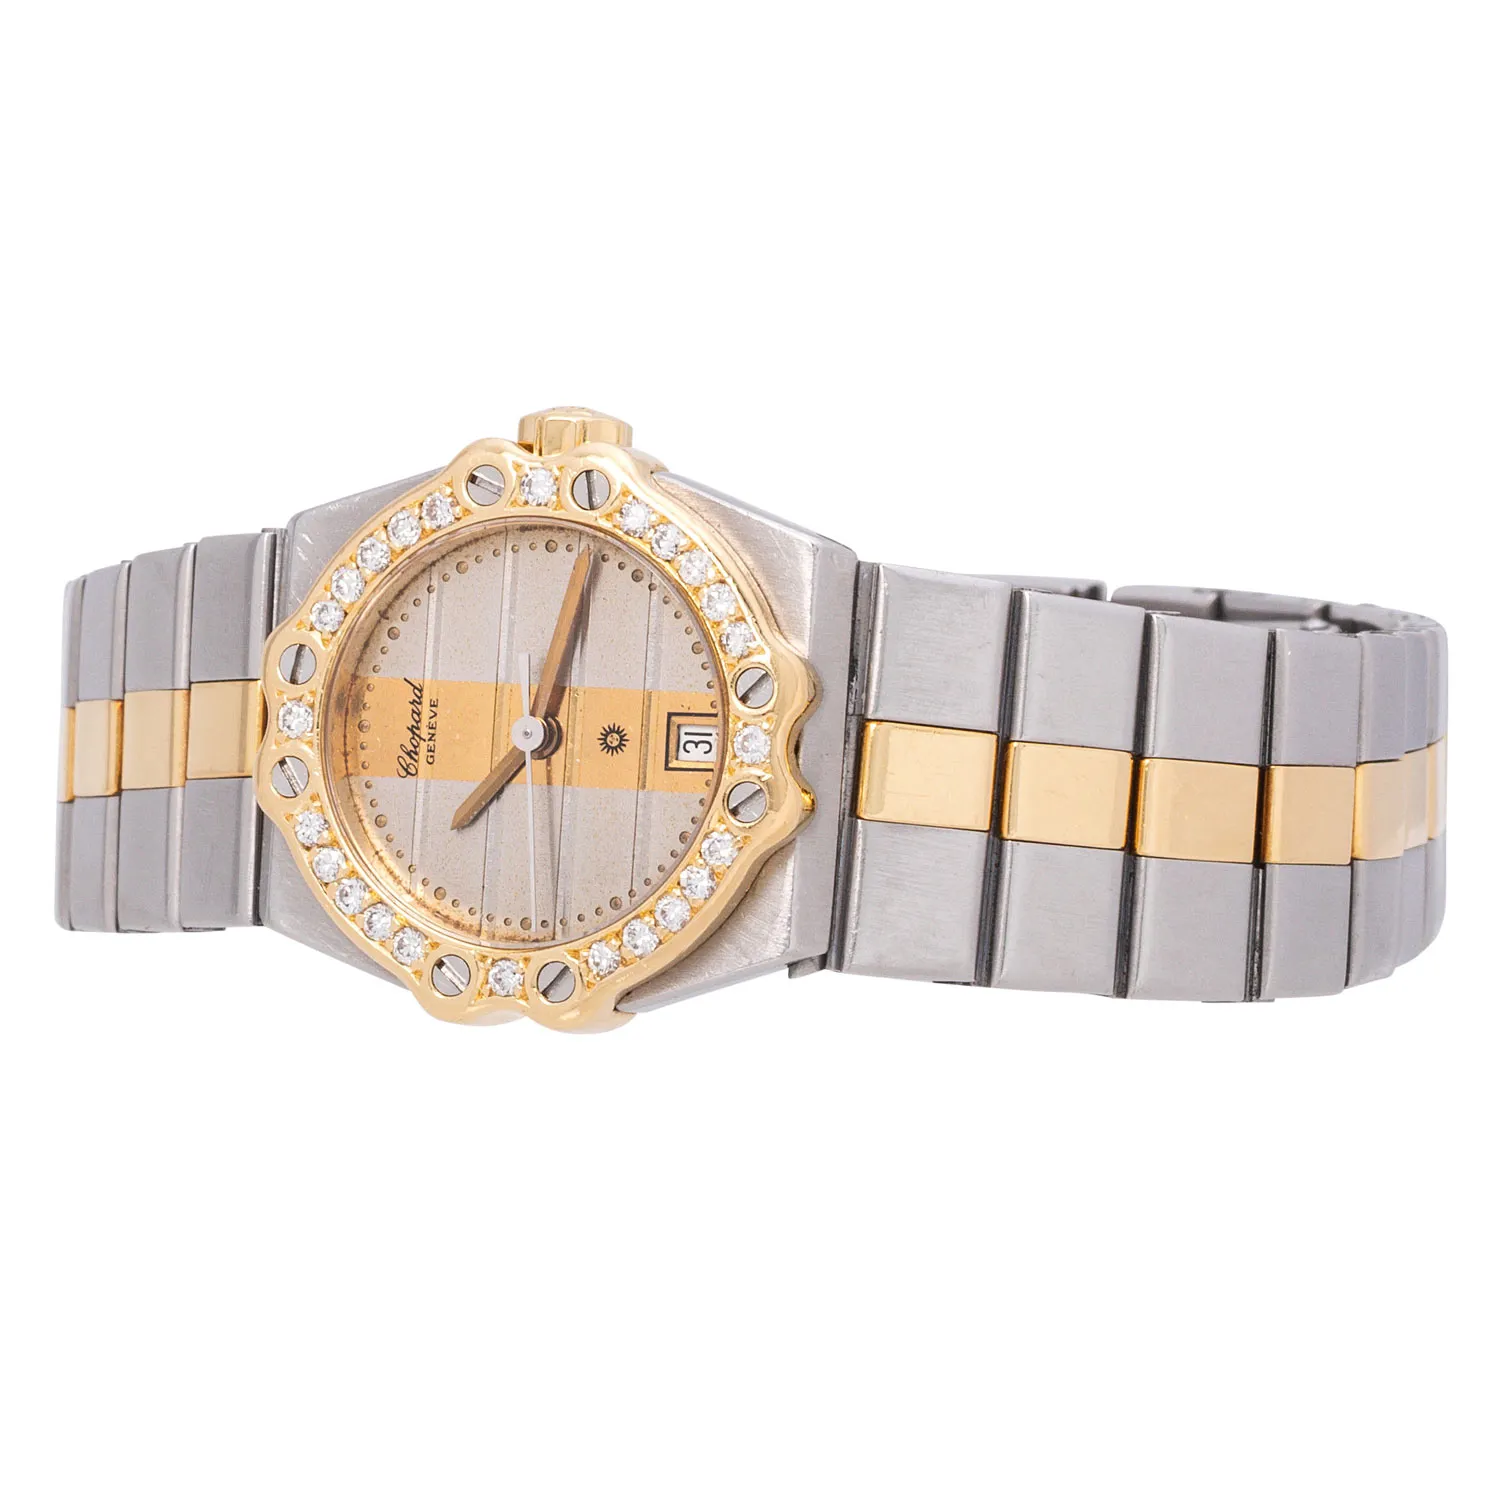 Chopard St. Moritz 8024 24mm Yellow gold, stainless steel and diamond-set 5